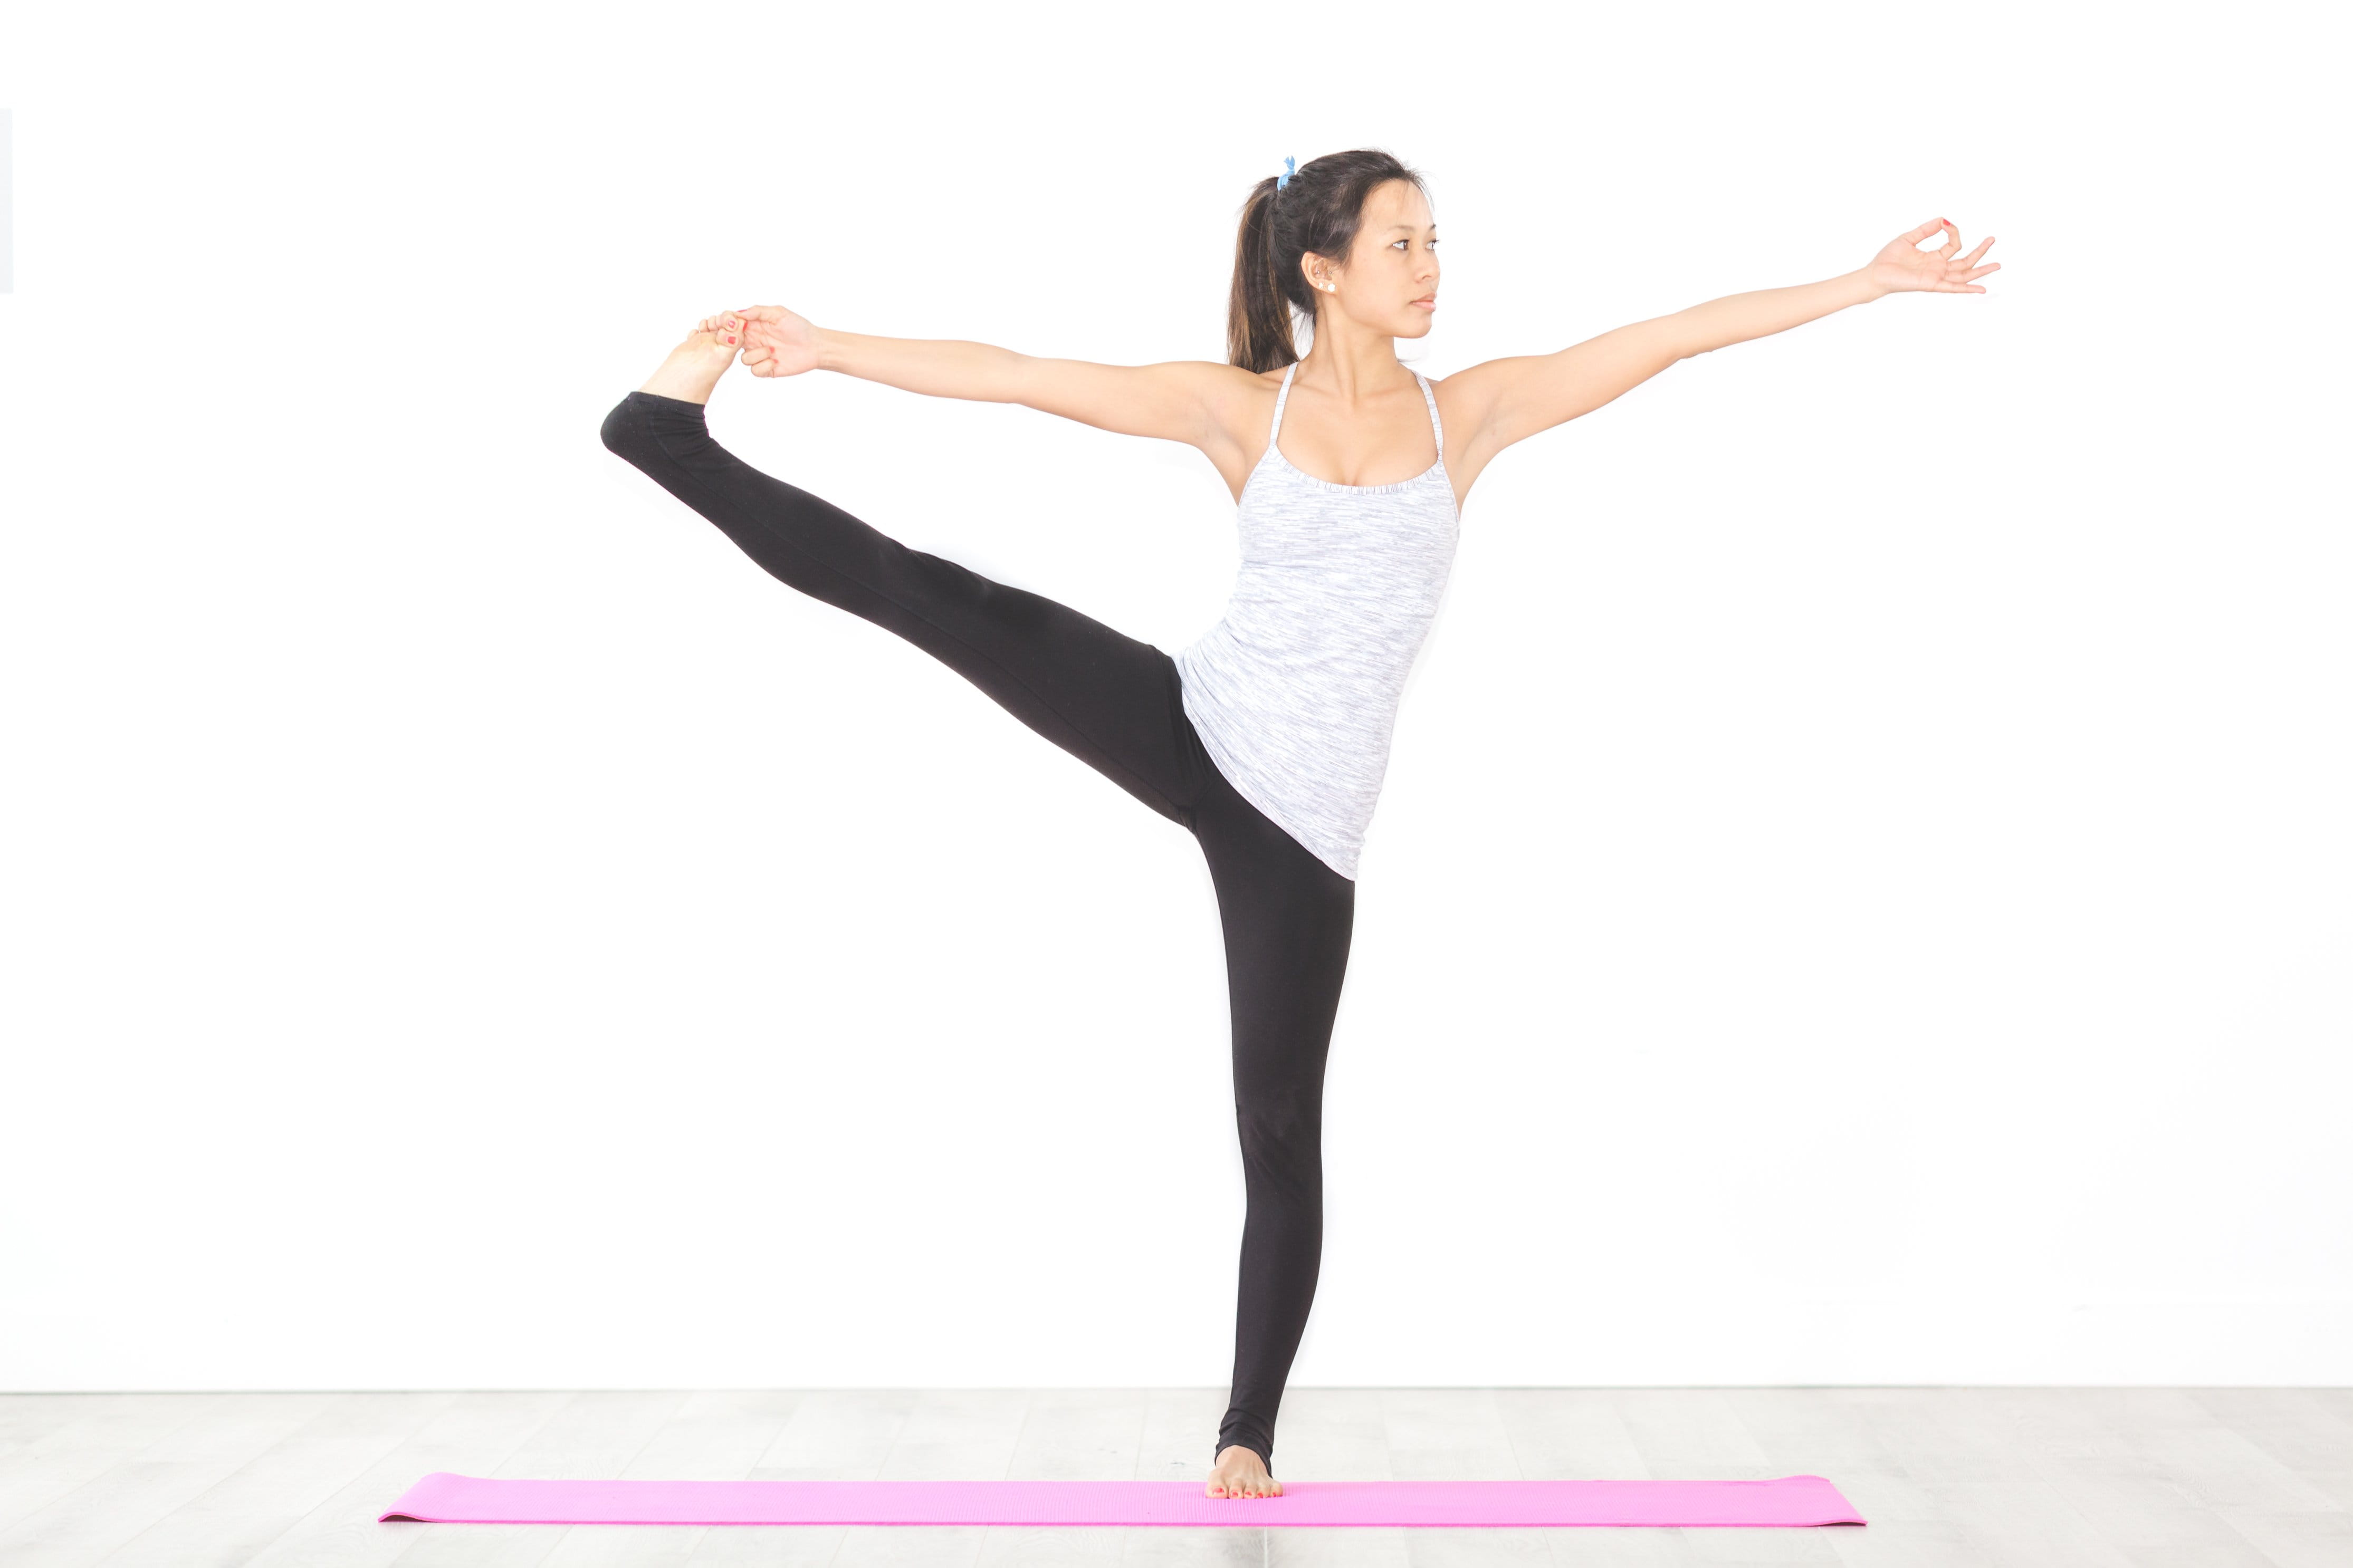 Extended Hand To Toe Pose Yoga Photo, Fitness, Women, Sports